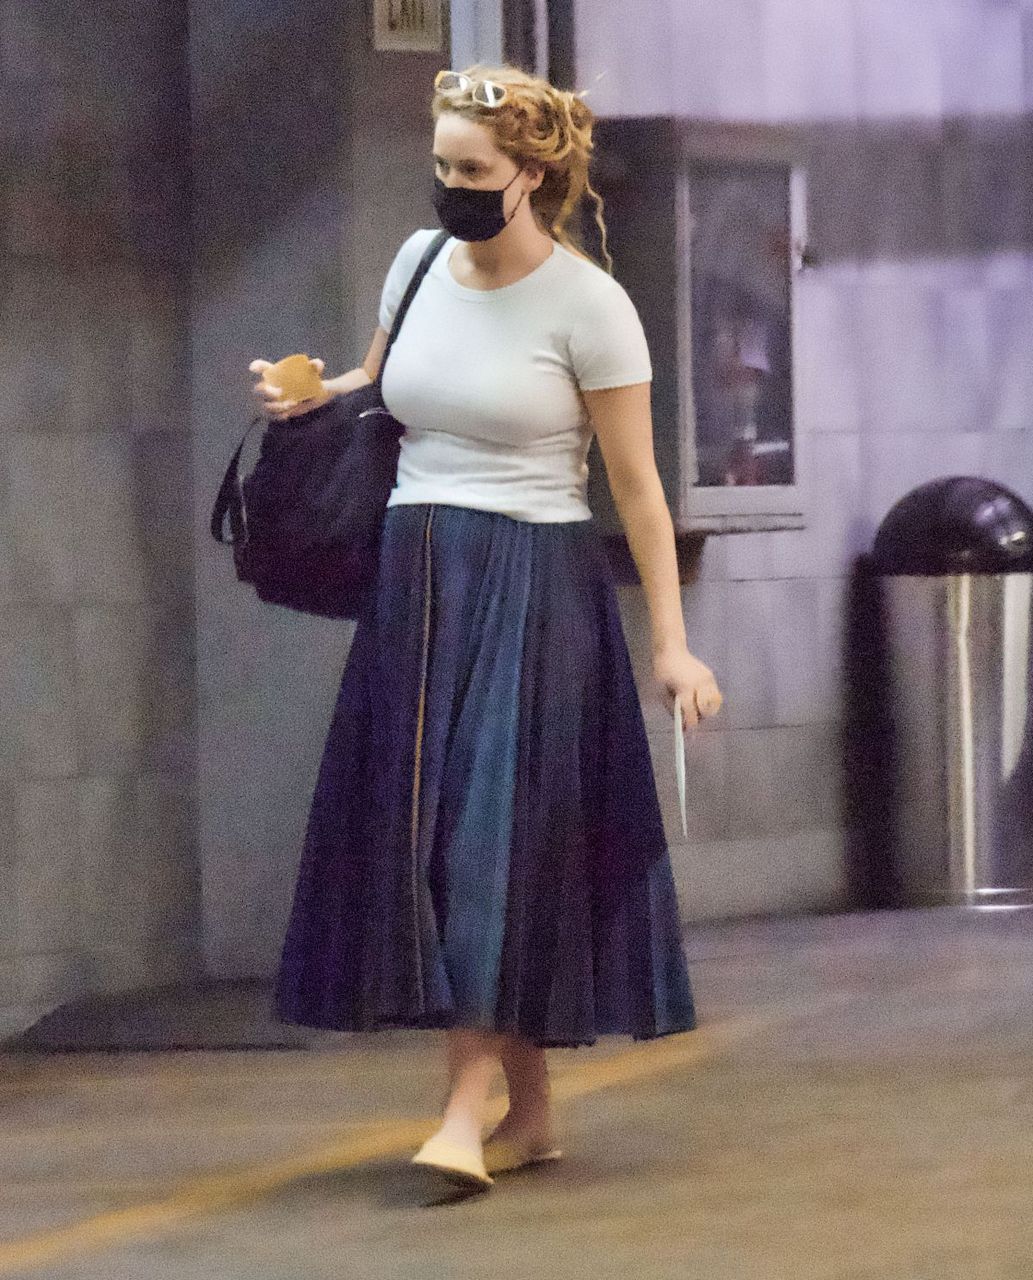 Jennifer Lawrence And Cooke Maroney Out With Their Baby Los Angeles